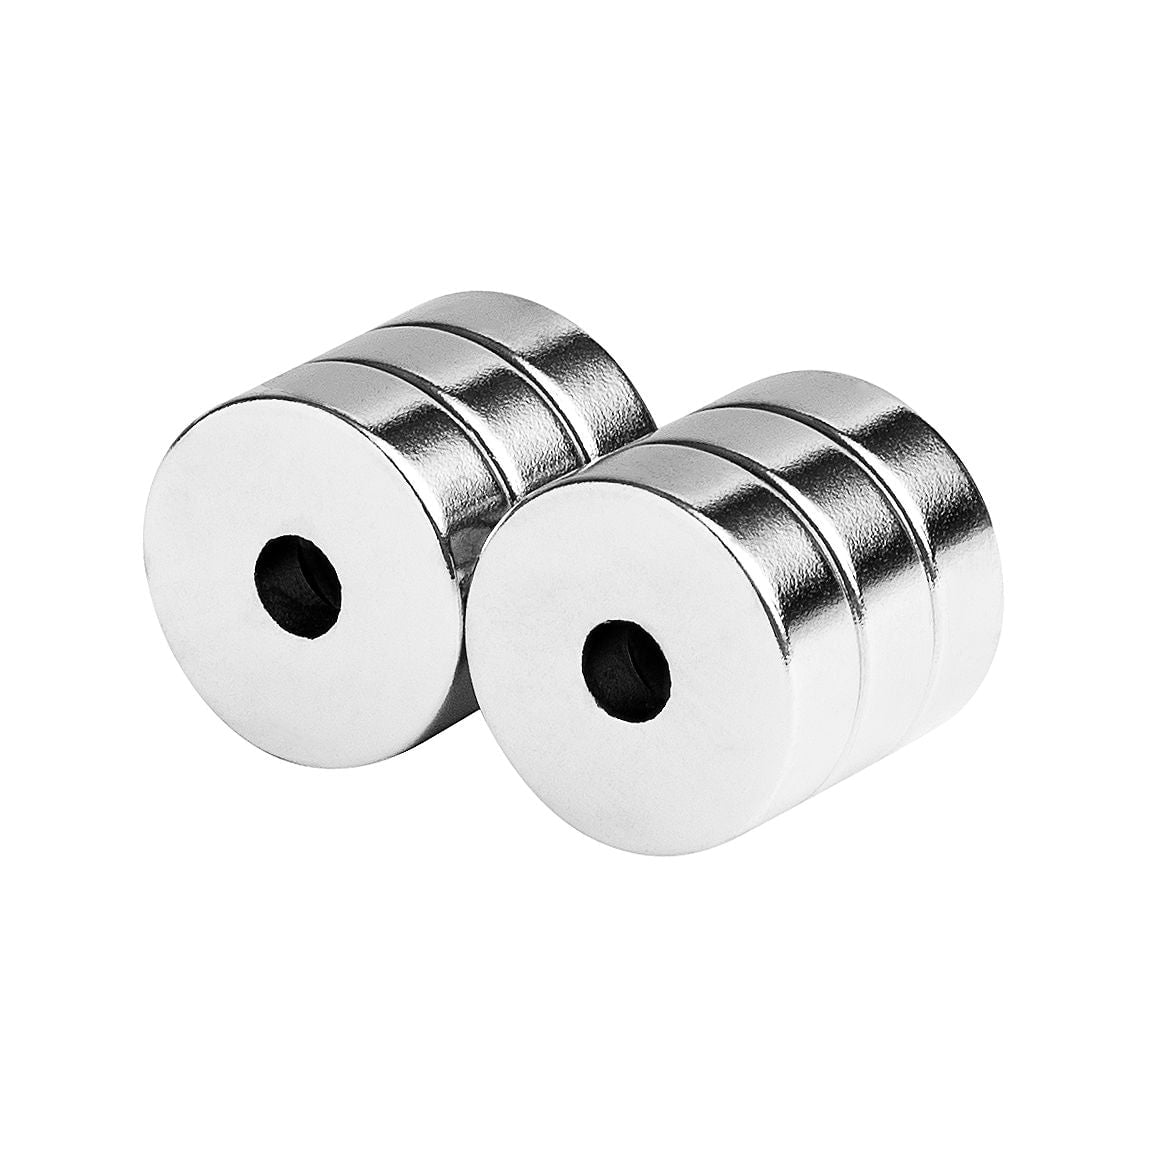 1 x 1/4 x 1/8 Inch Large Neodymium Rare Earth Ring Magnets N48 6 Pack 